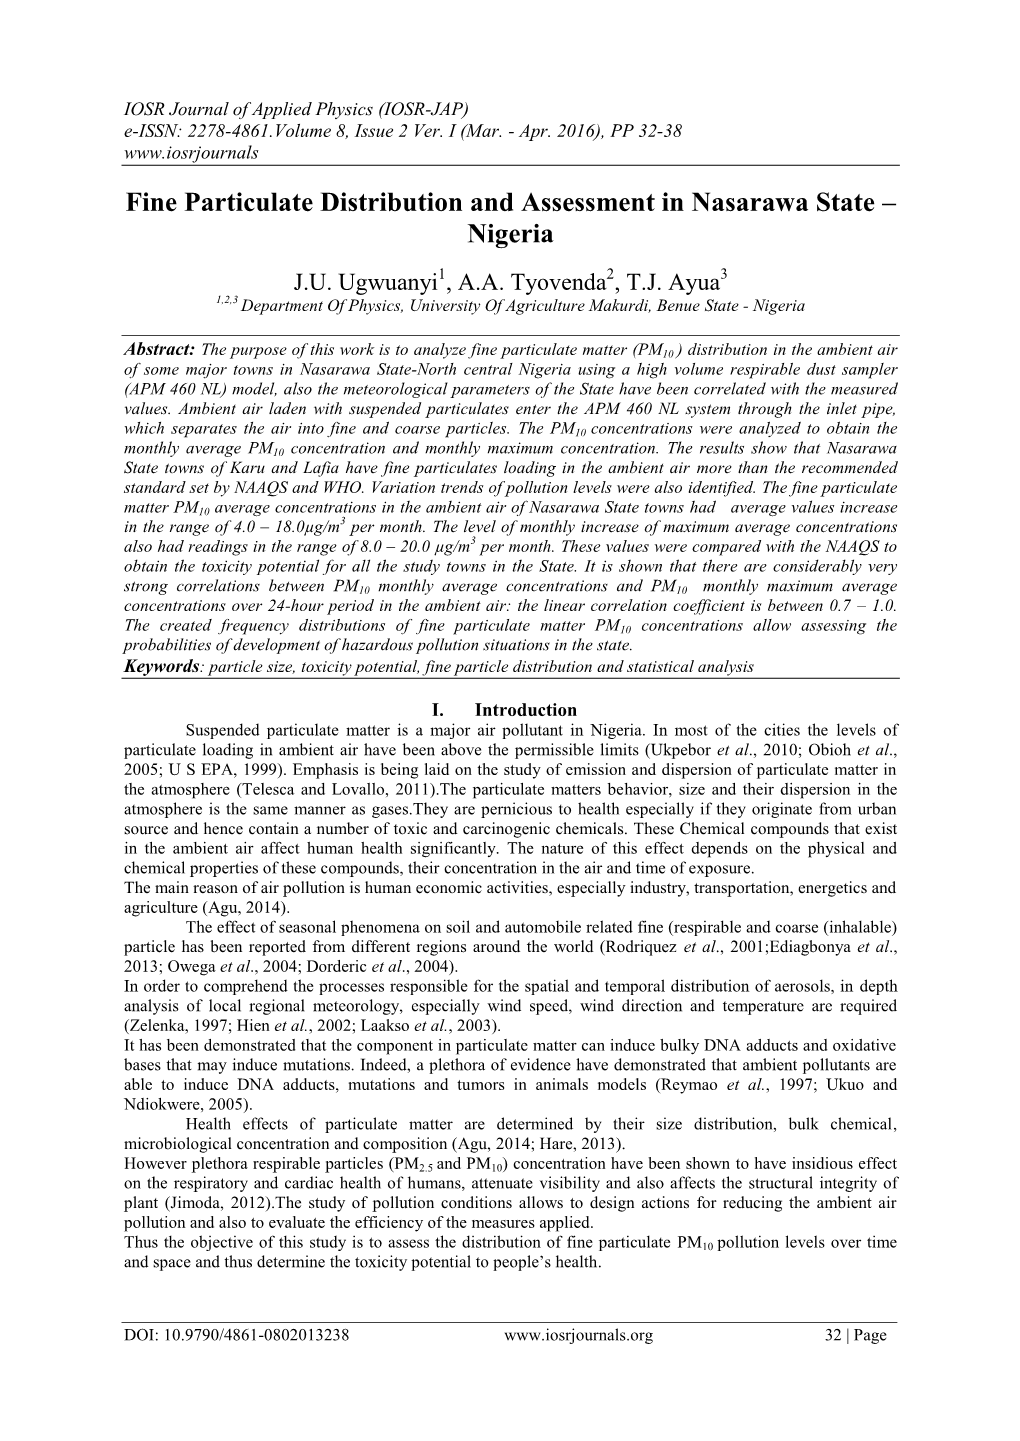 Fine Particulate Distribution and Assessment in Nasarawa State – Nigeria